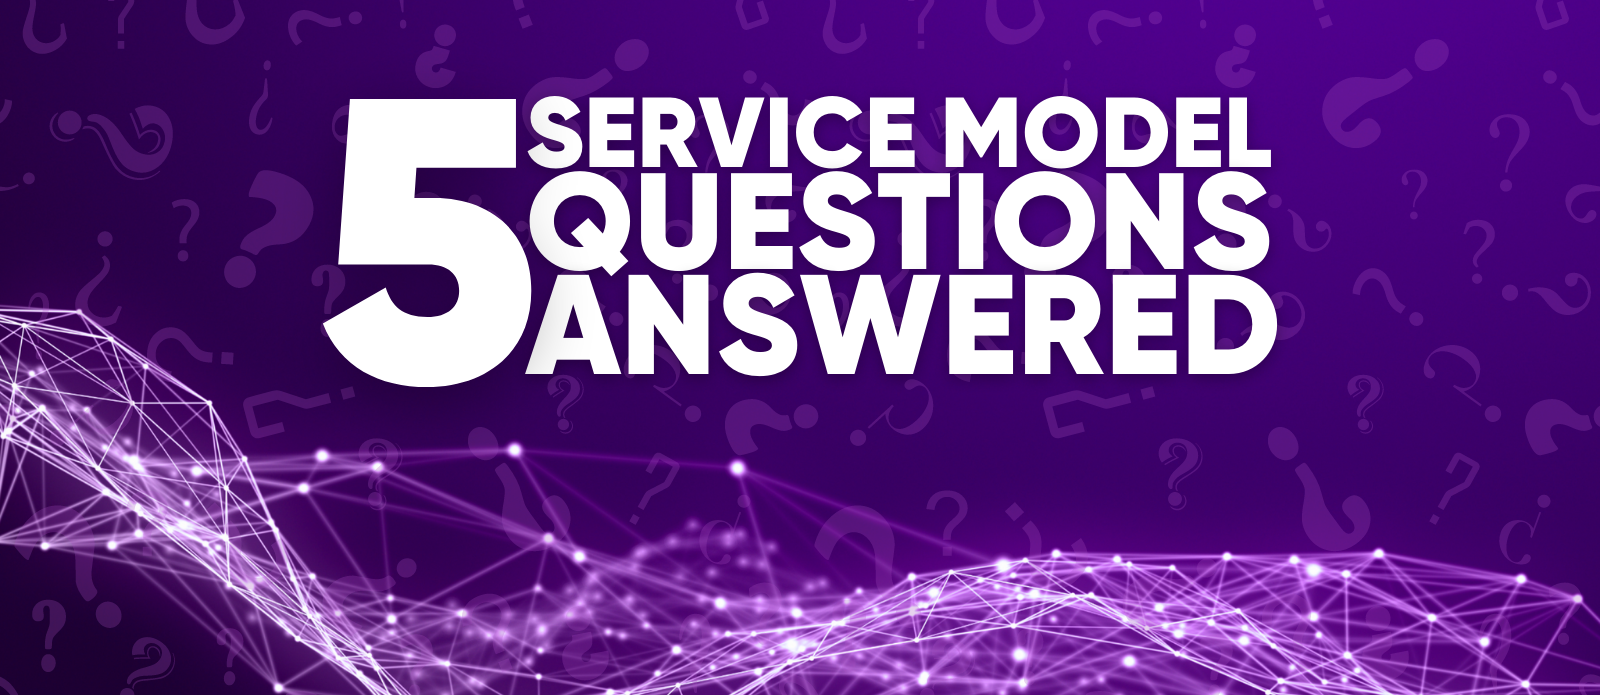 Purple abstract background with "5 Service Model Questions Answered"